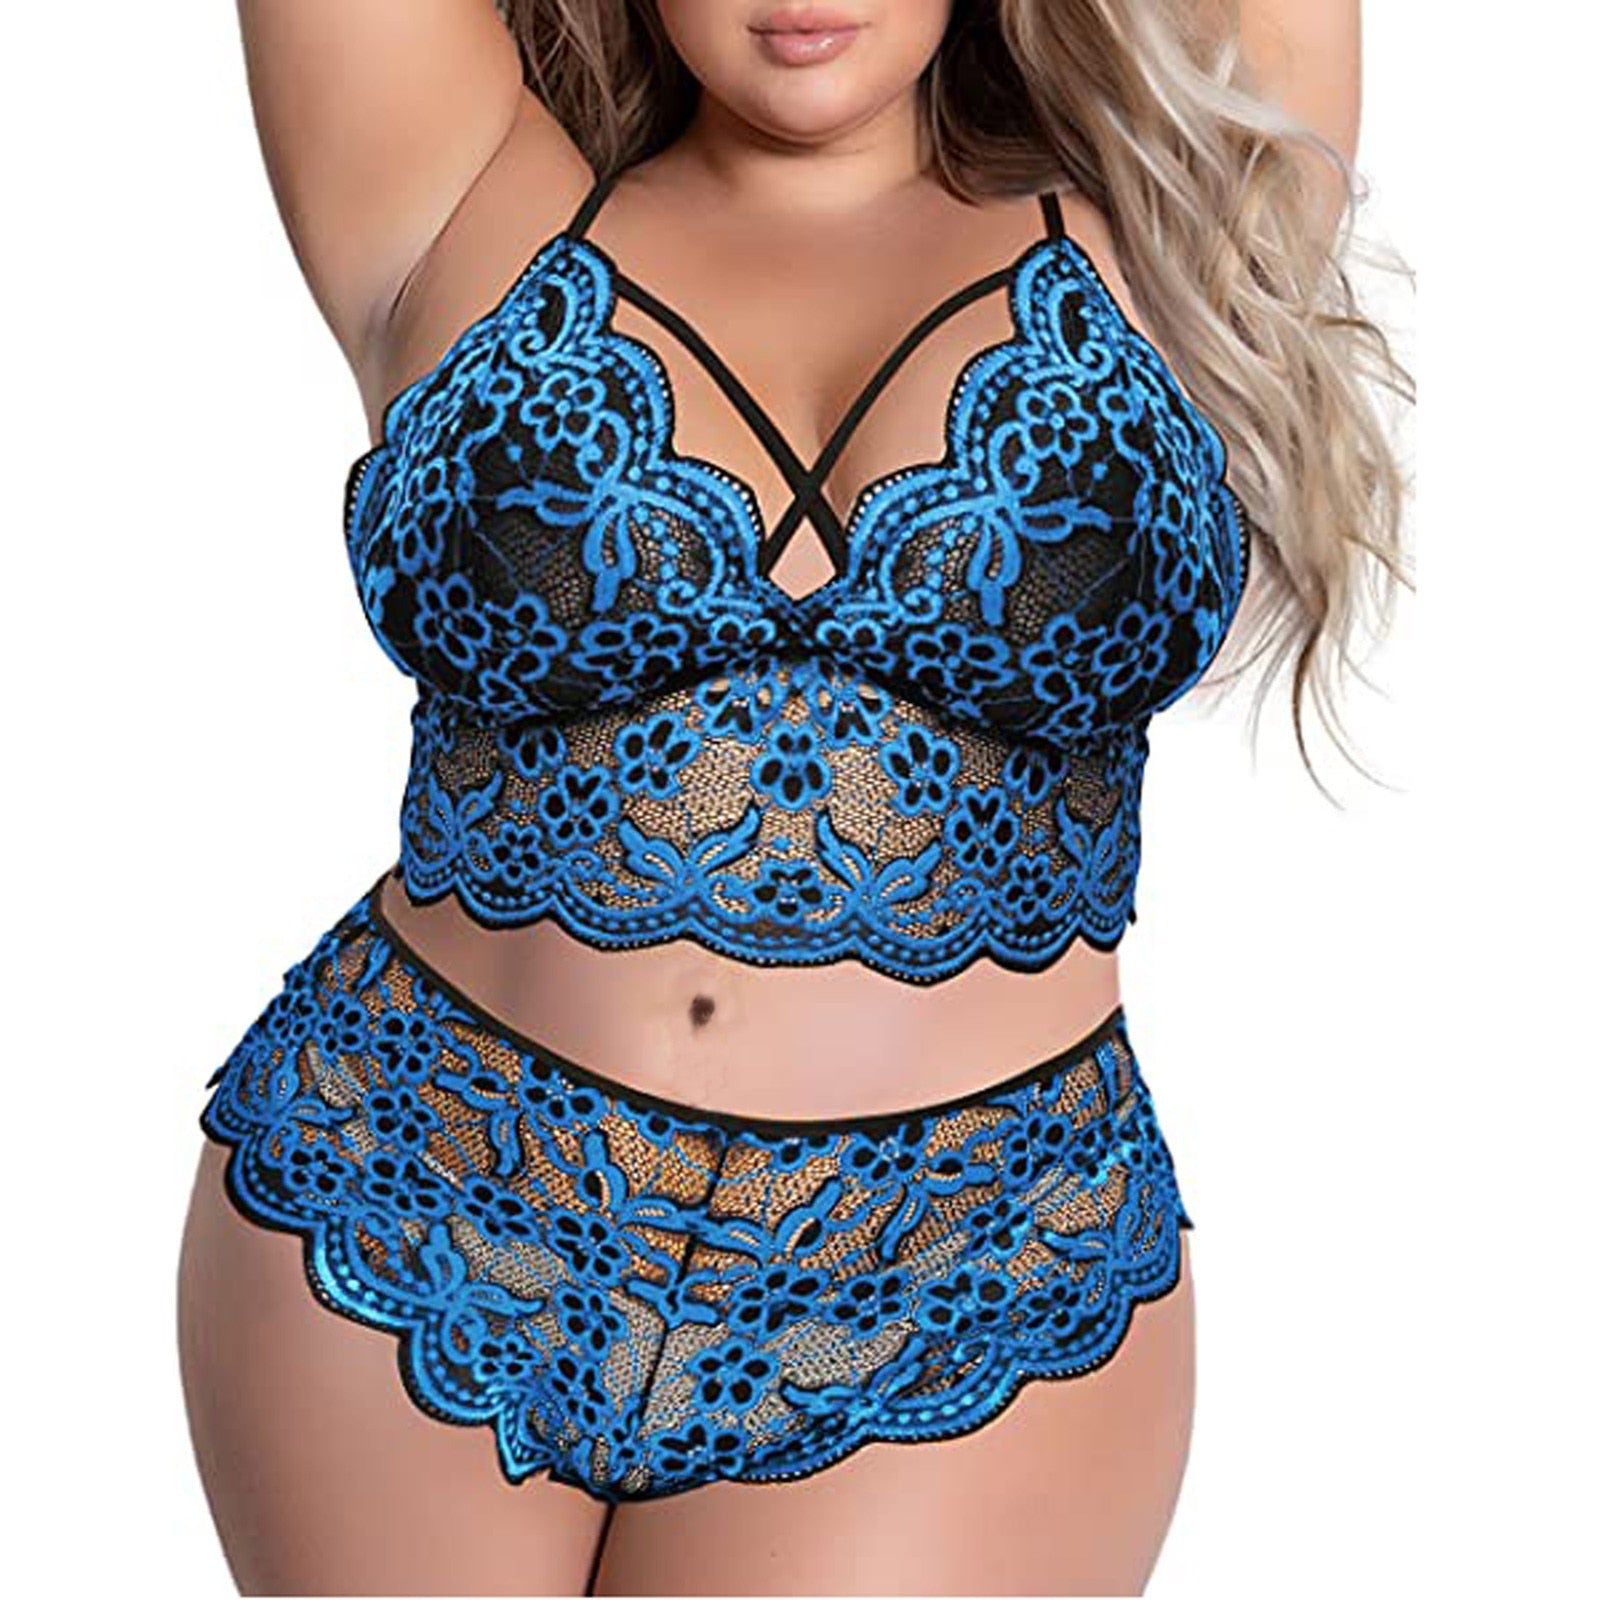 Exotic Sexy Lingerie - Plus Size